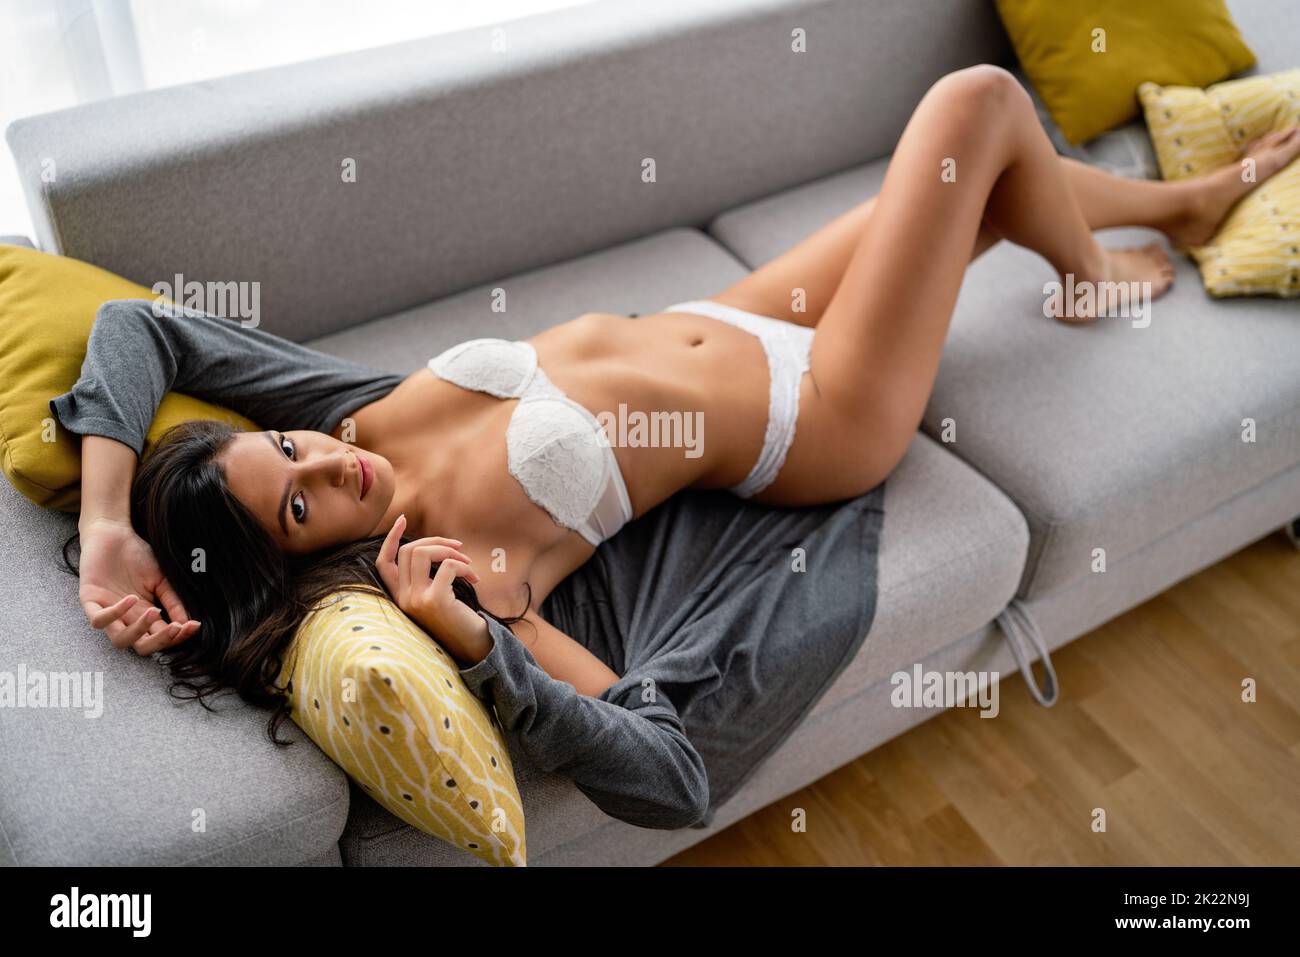 Sexy woman with perfect skin wearing stylish lingerie Stock Photo